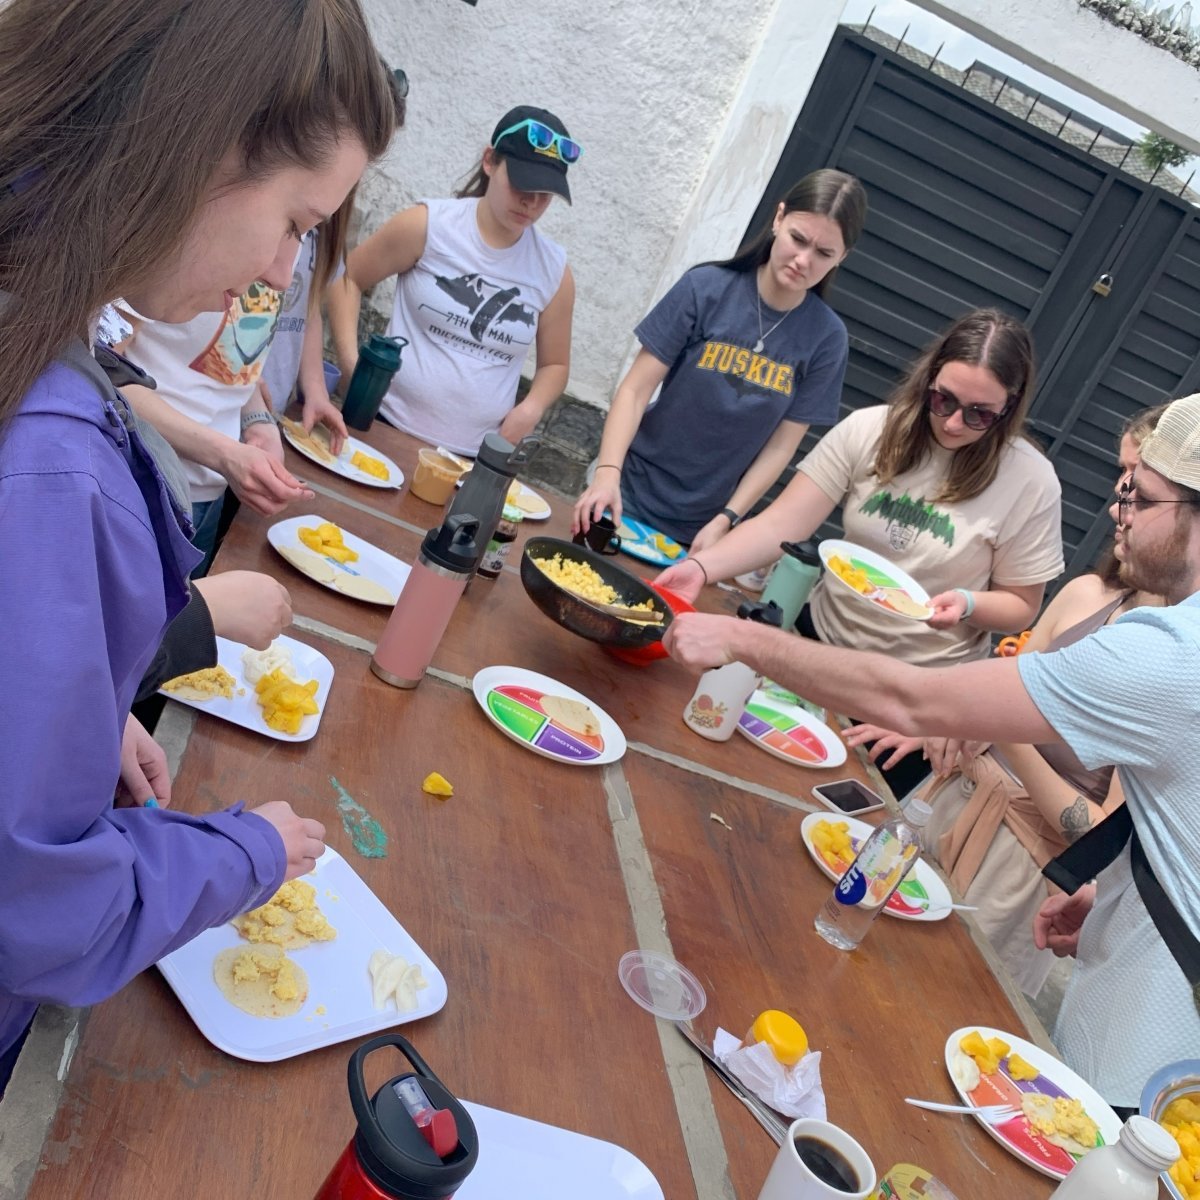 Ecaudor participants prepare and enjoy a family meal with local fruits